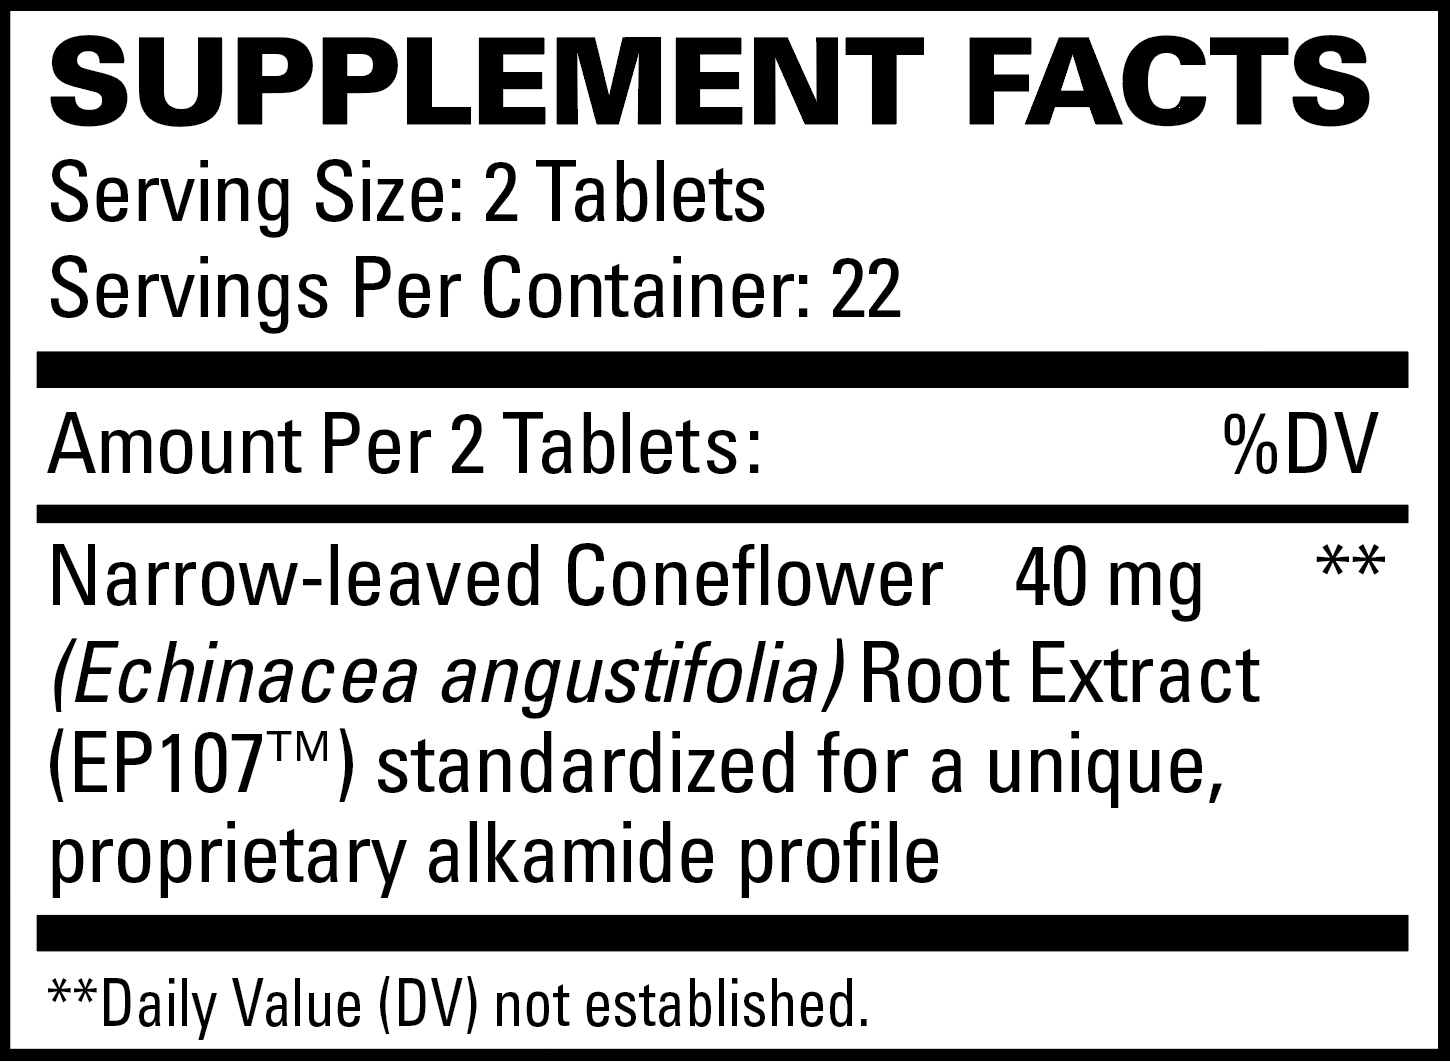 AnxioCalm supplement facts